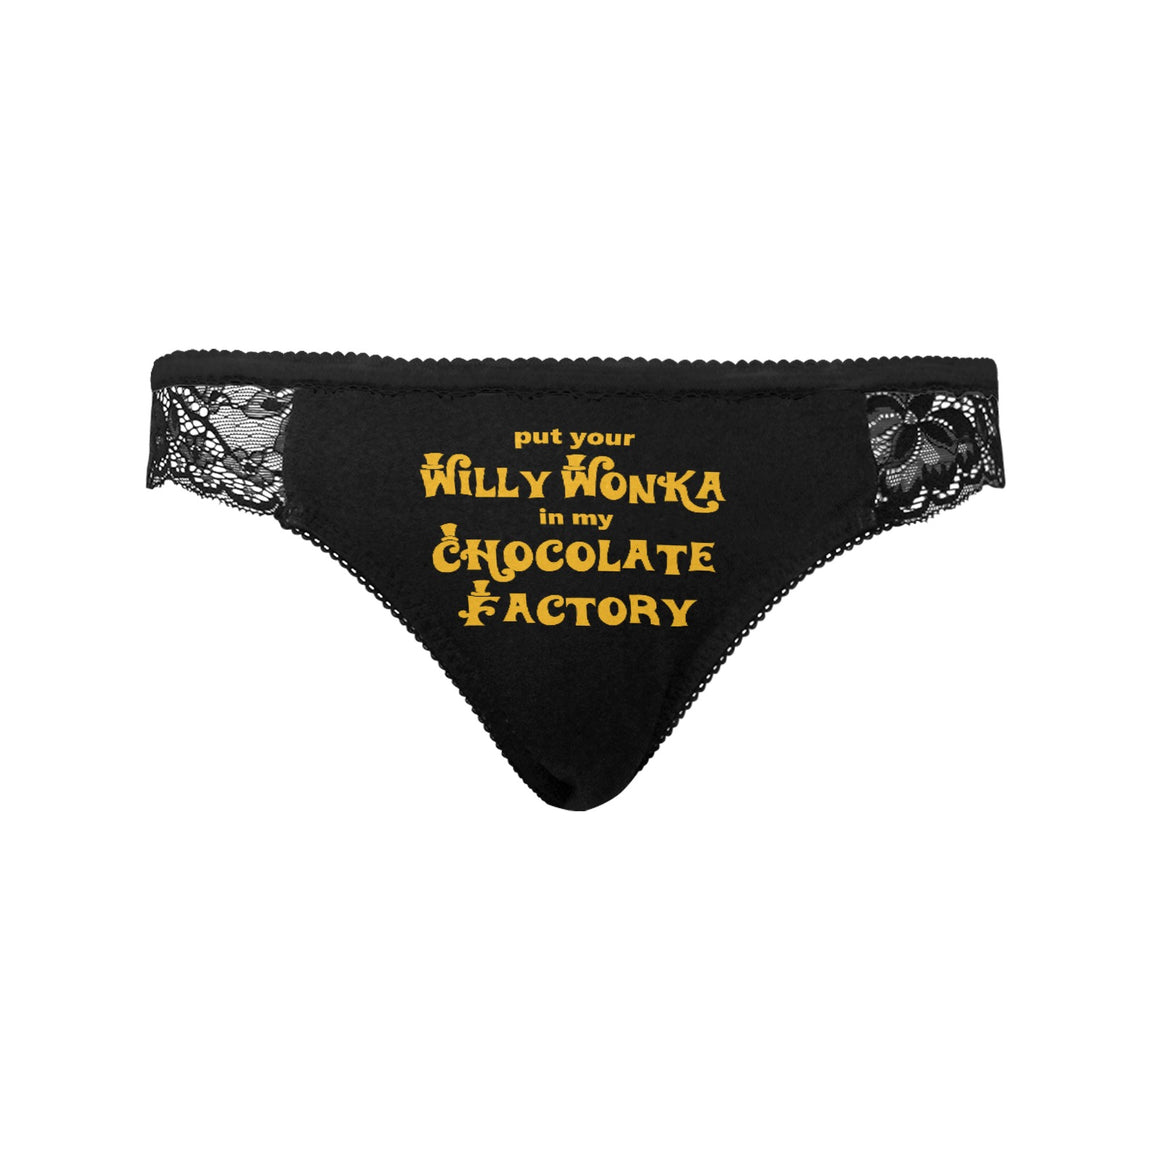 Put Your Willy Wonka In My Chocolate Factory Women's Lace Underwear